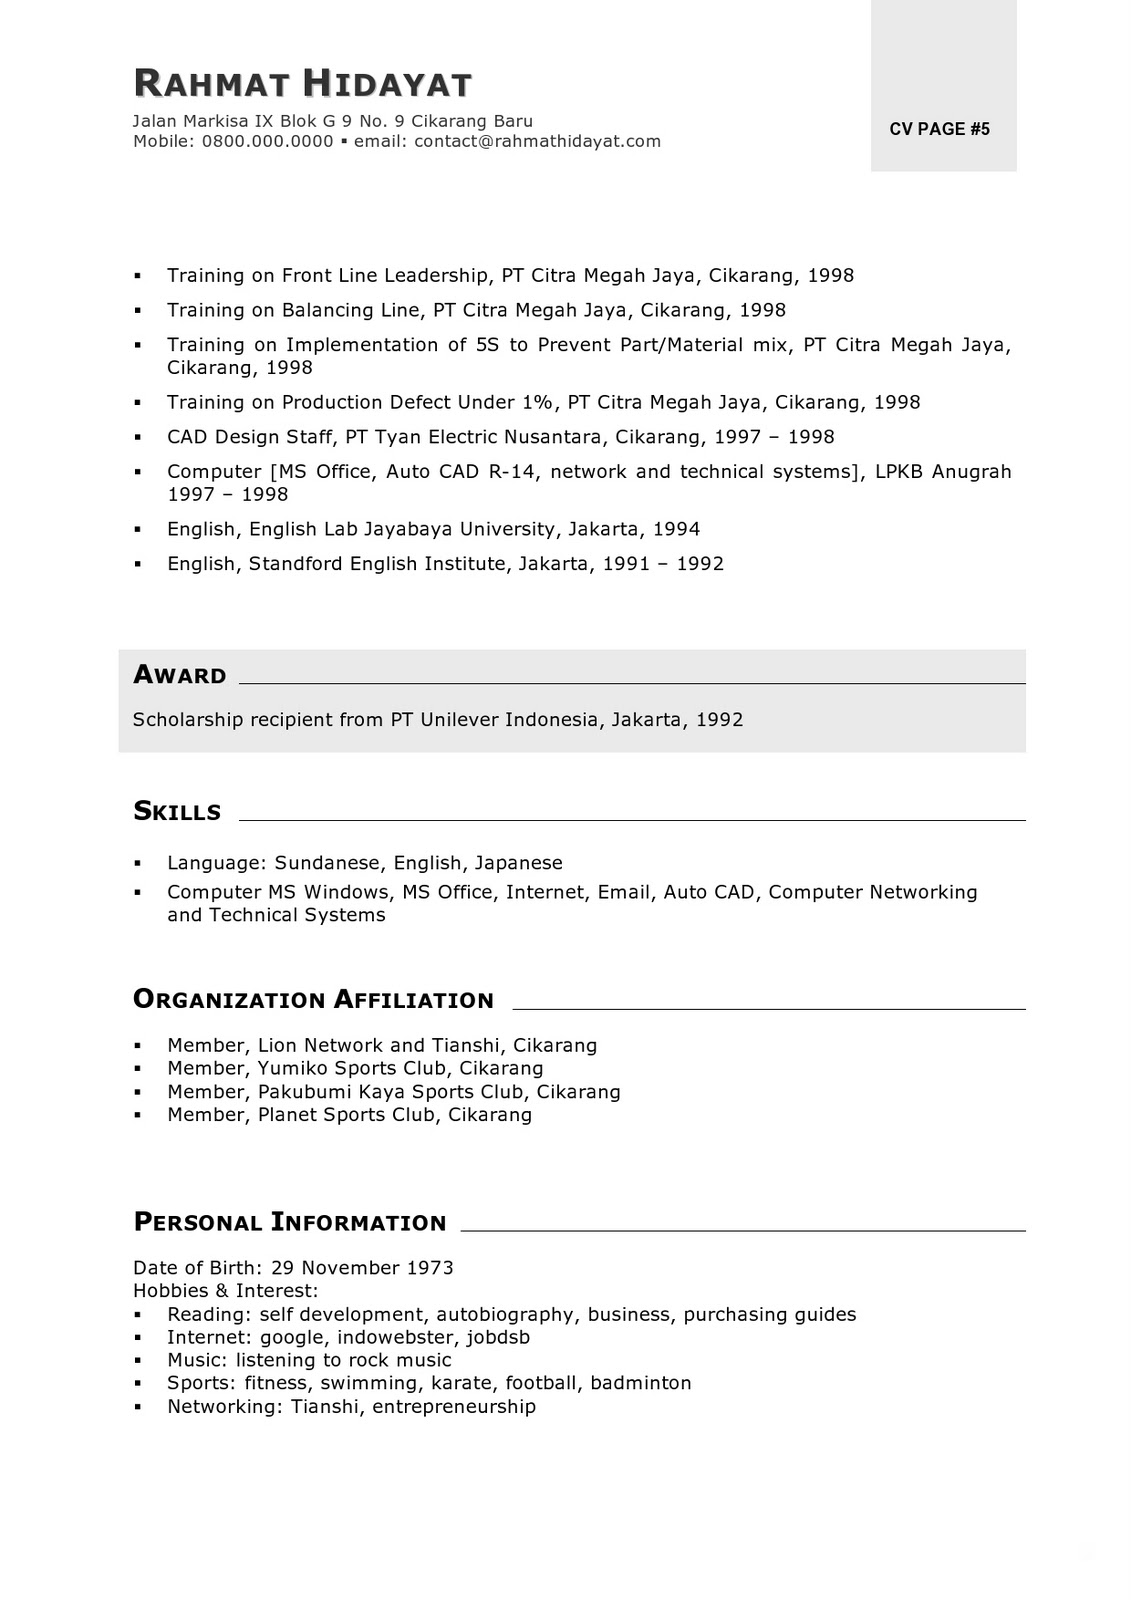 covering-letter-for-cv-with-reference